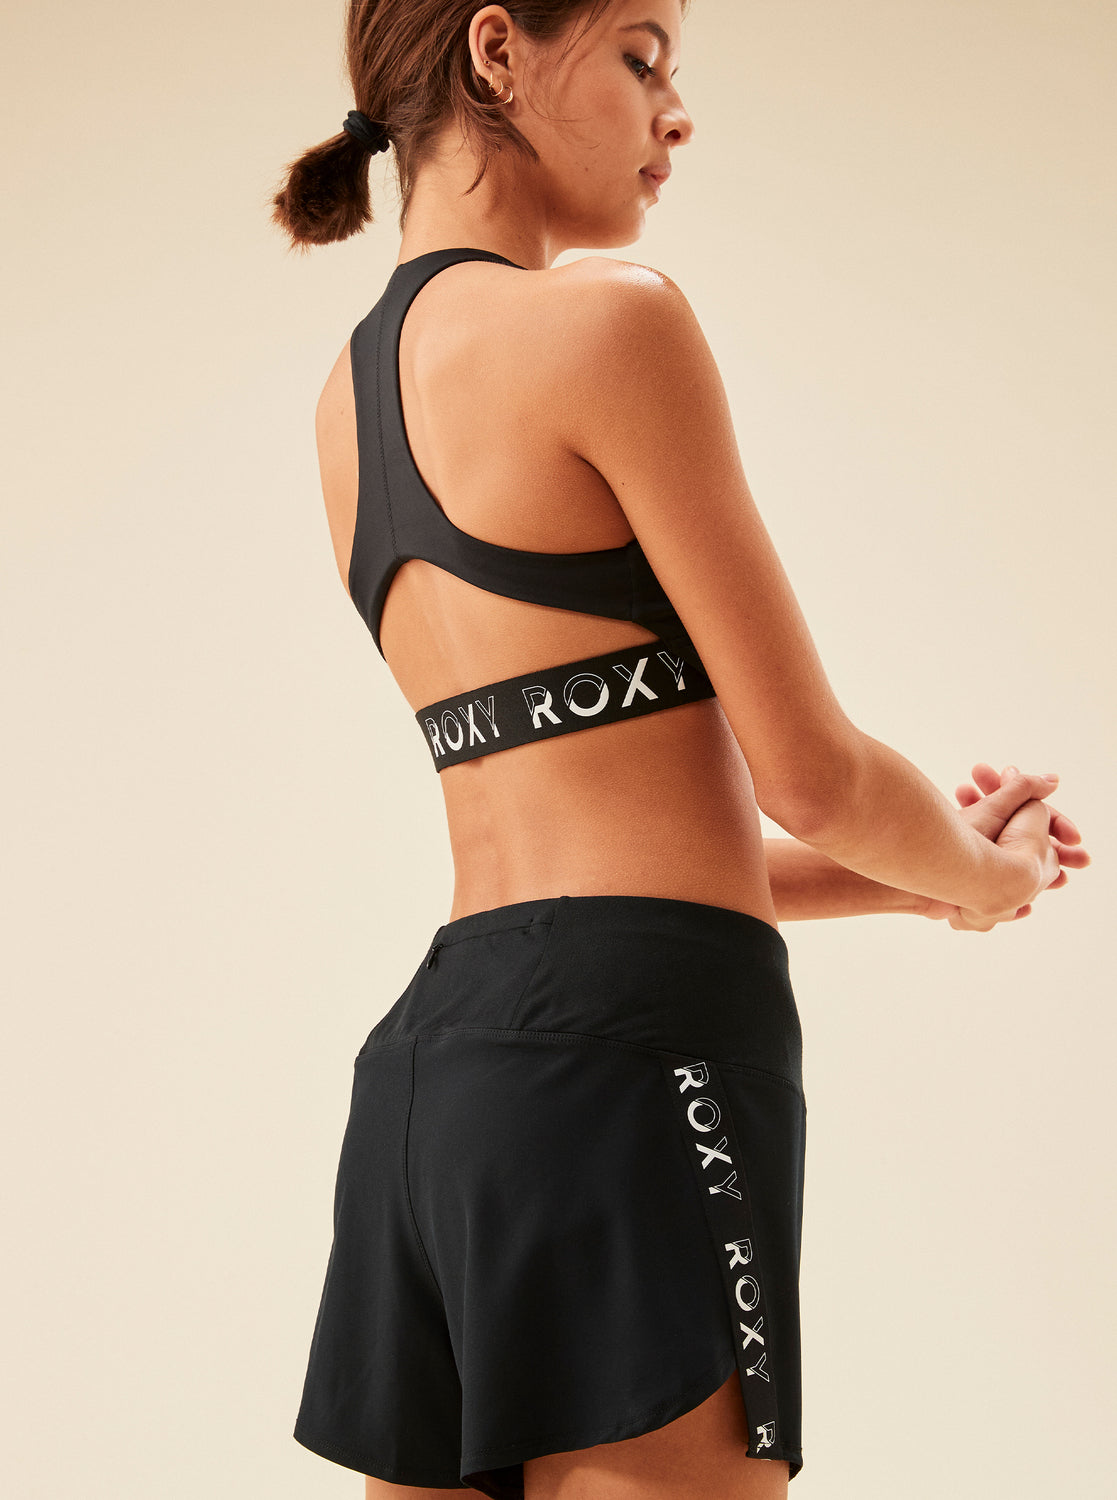 Roxy Bold Moves Technical Shorts from back in black